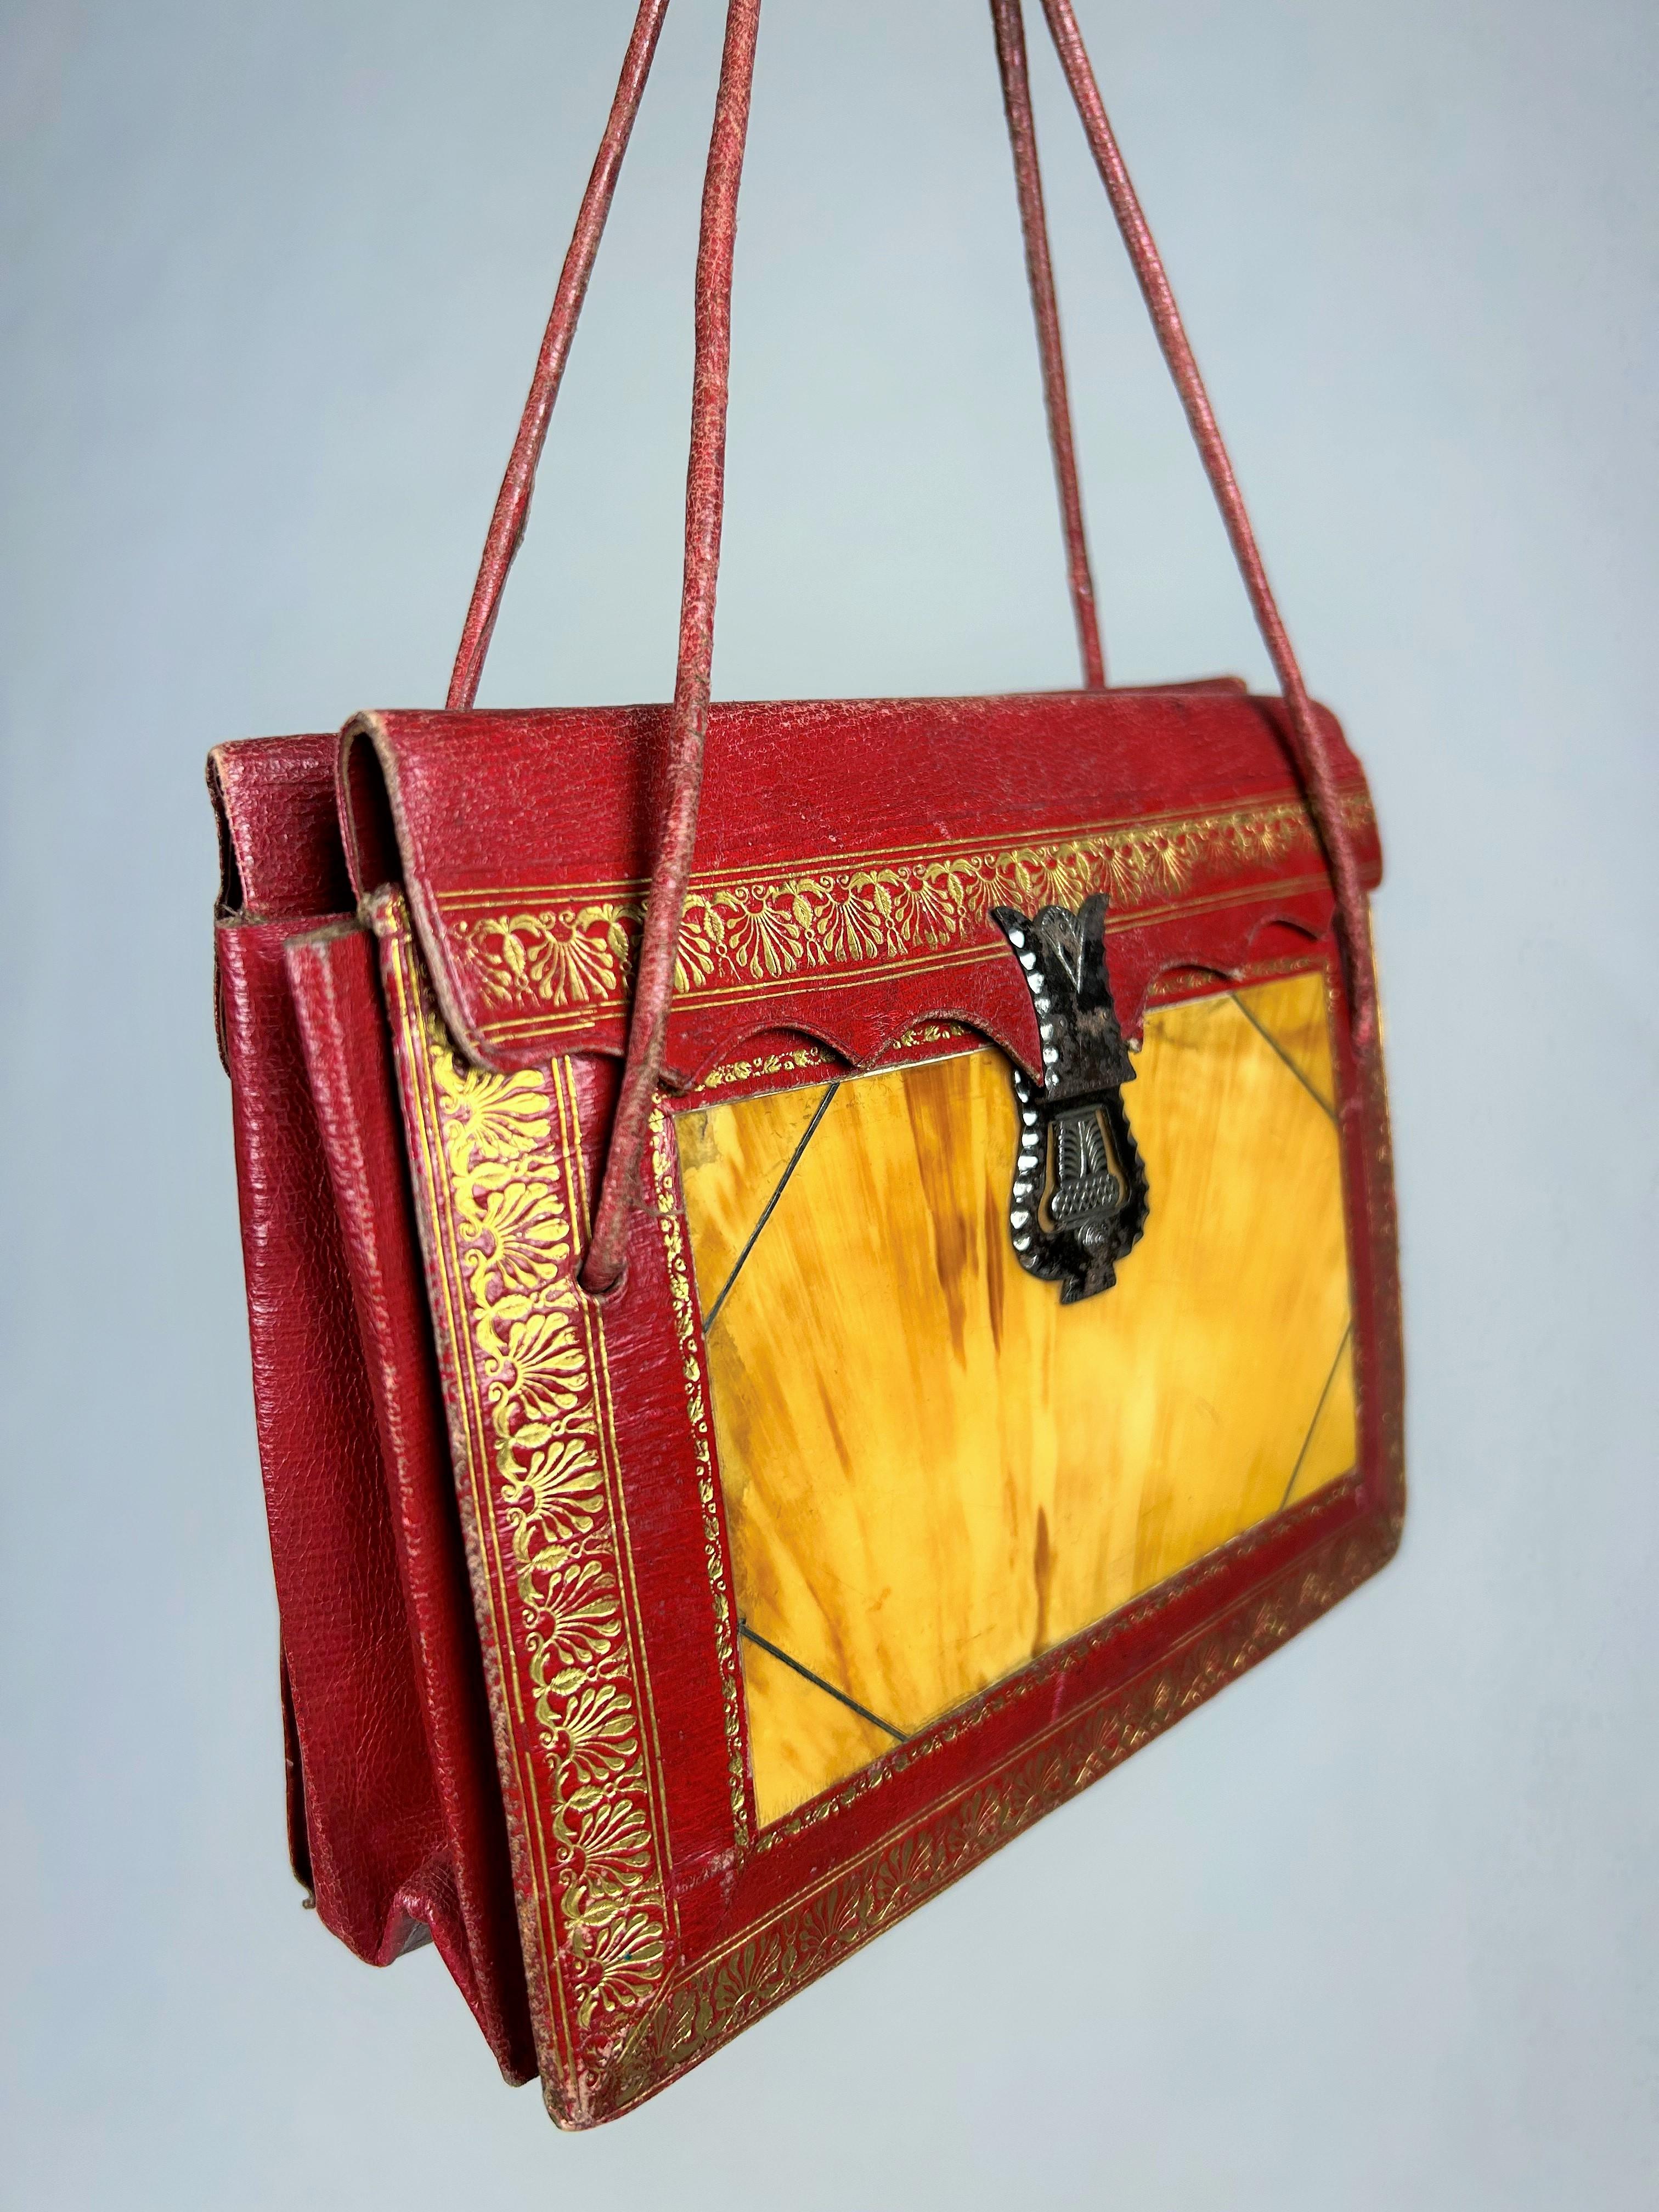 A precious red Leather Reticule with tortoiseshell inlay - England Dated 1836 In Good Condition For Sale In Toulon, FR